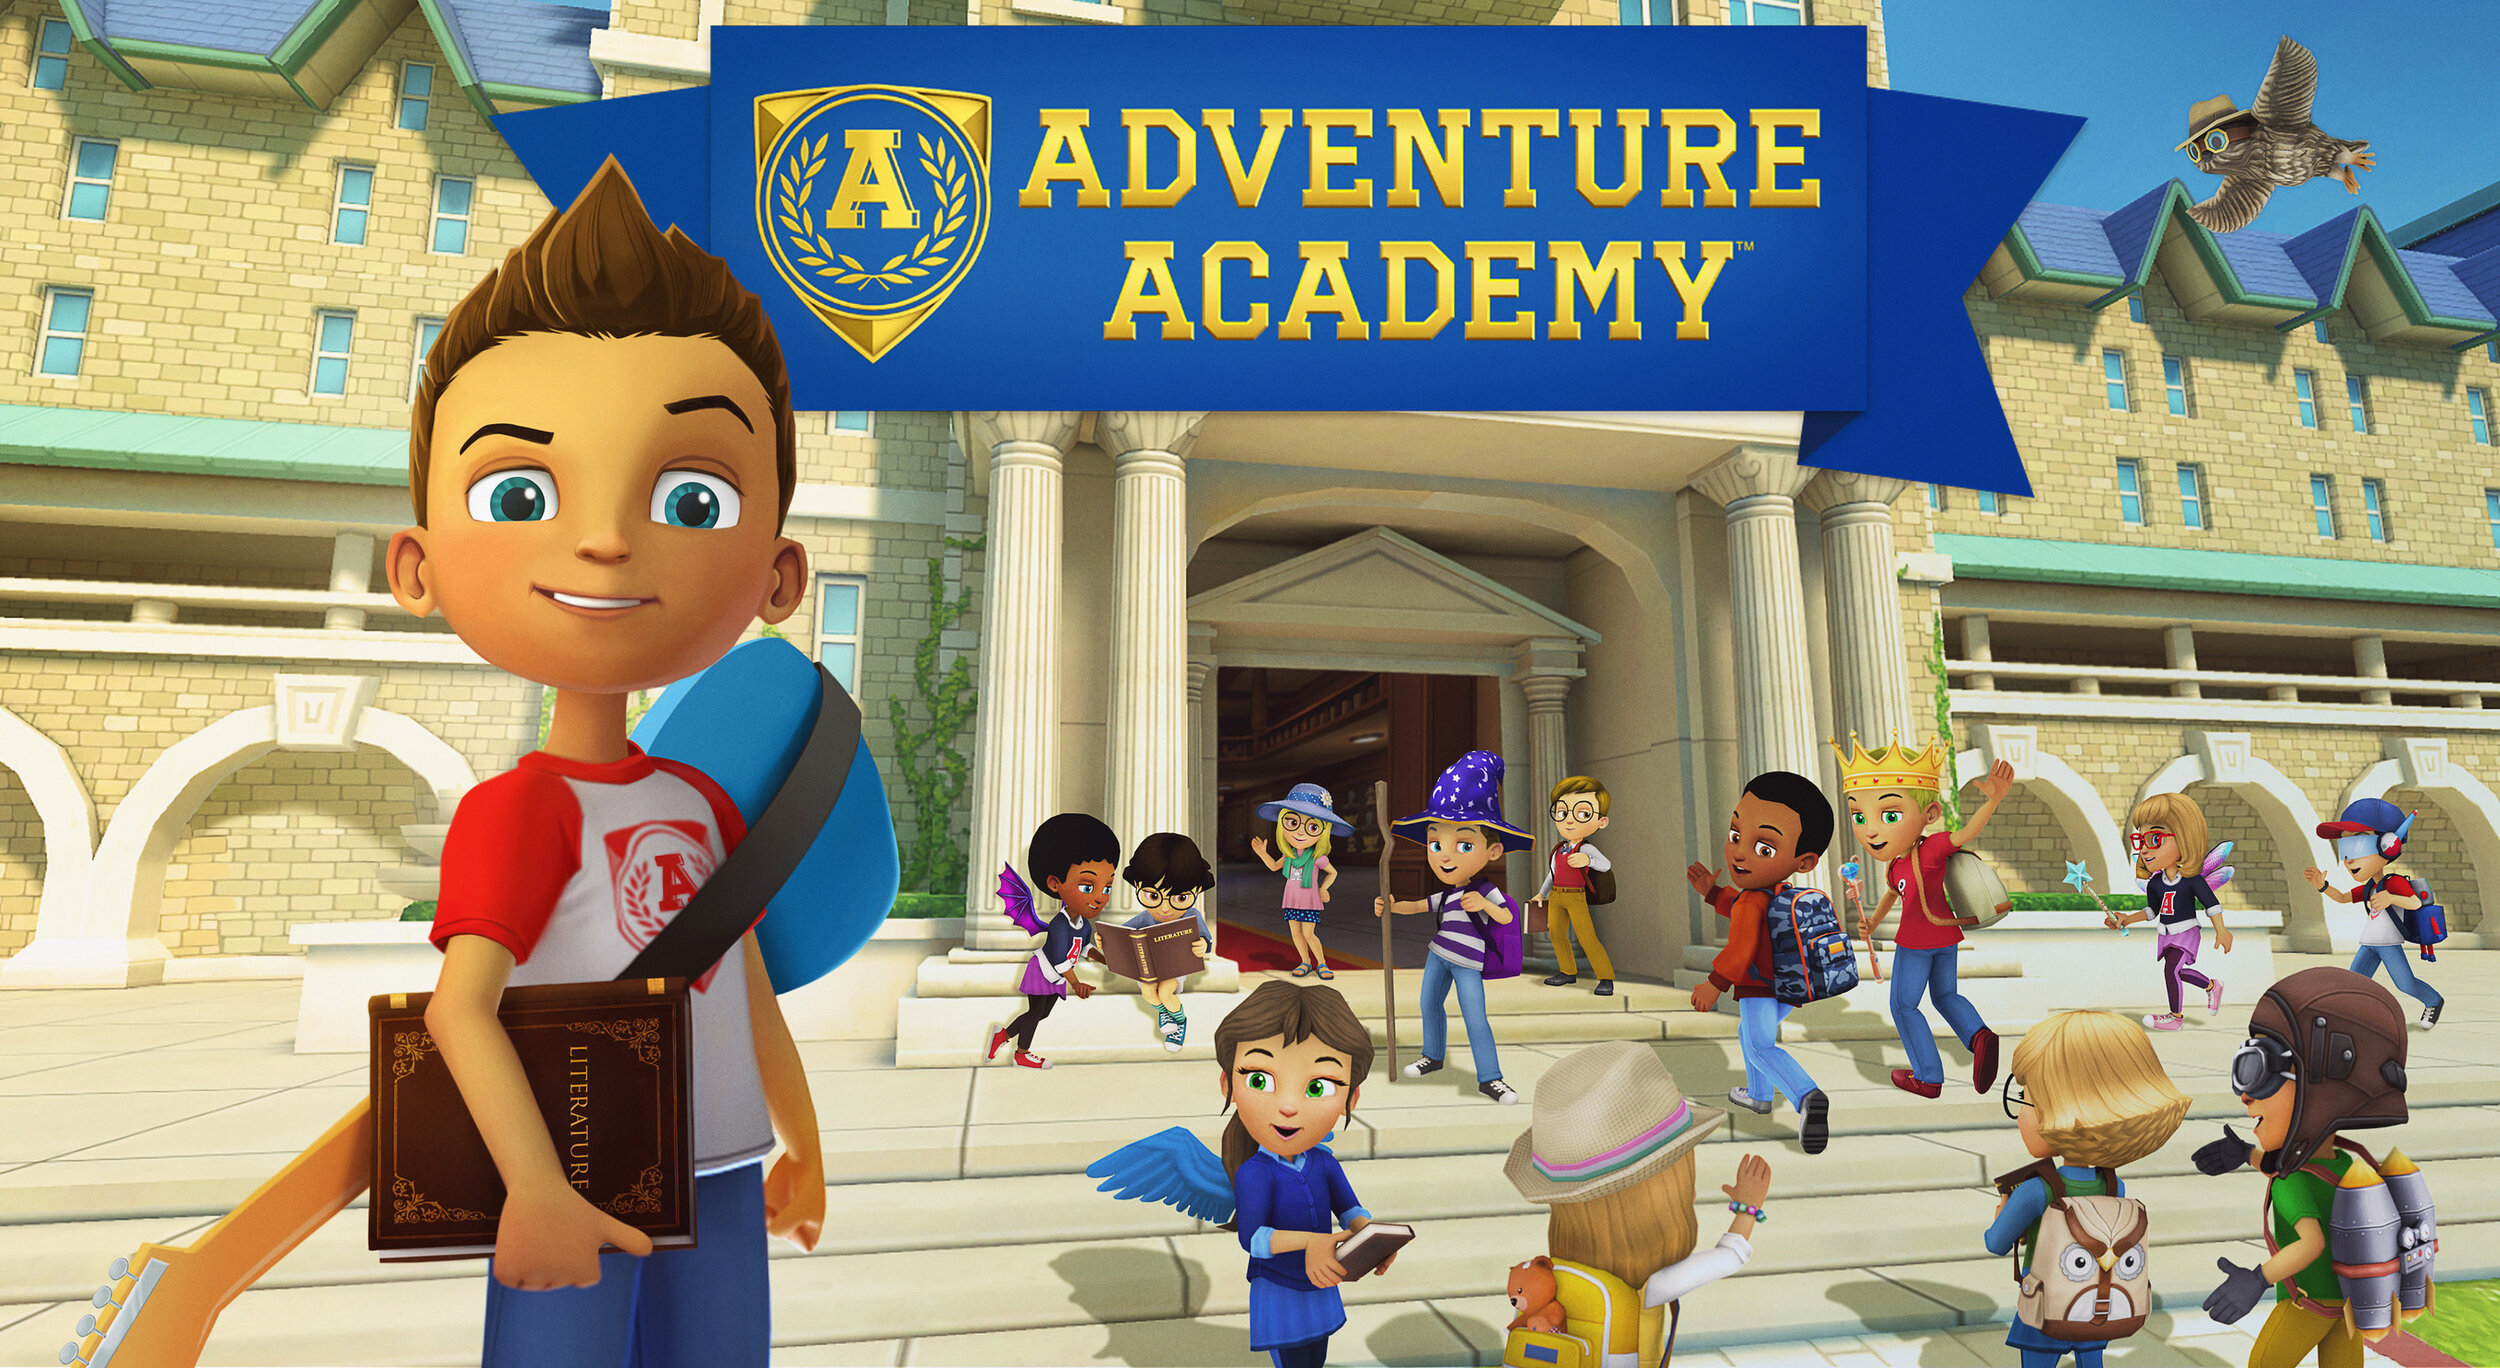 Age of Learning - Adventure Academy